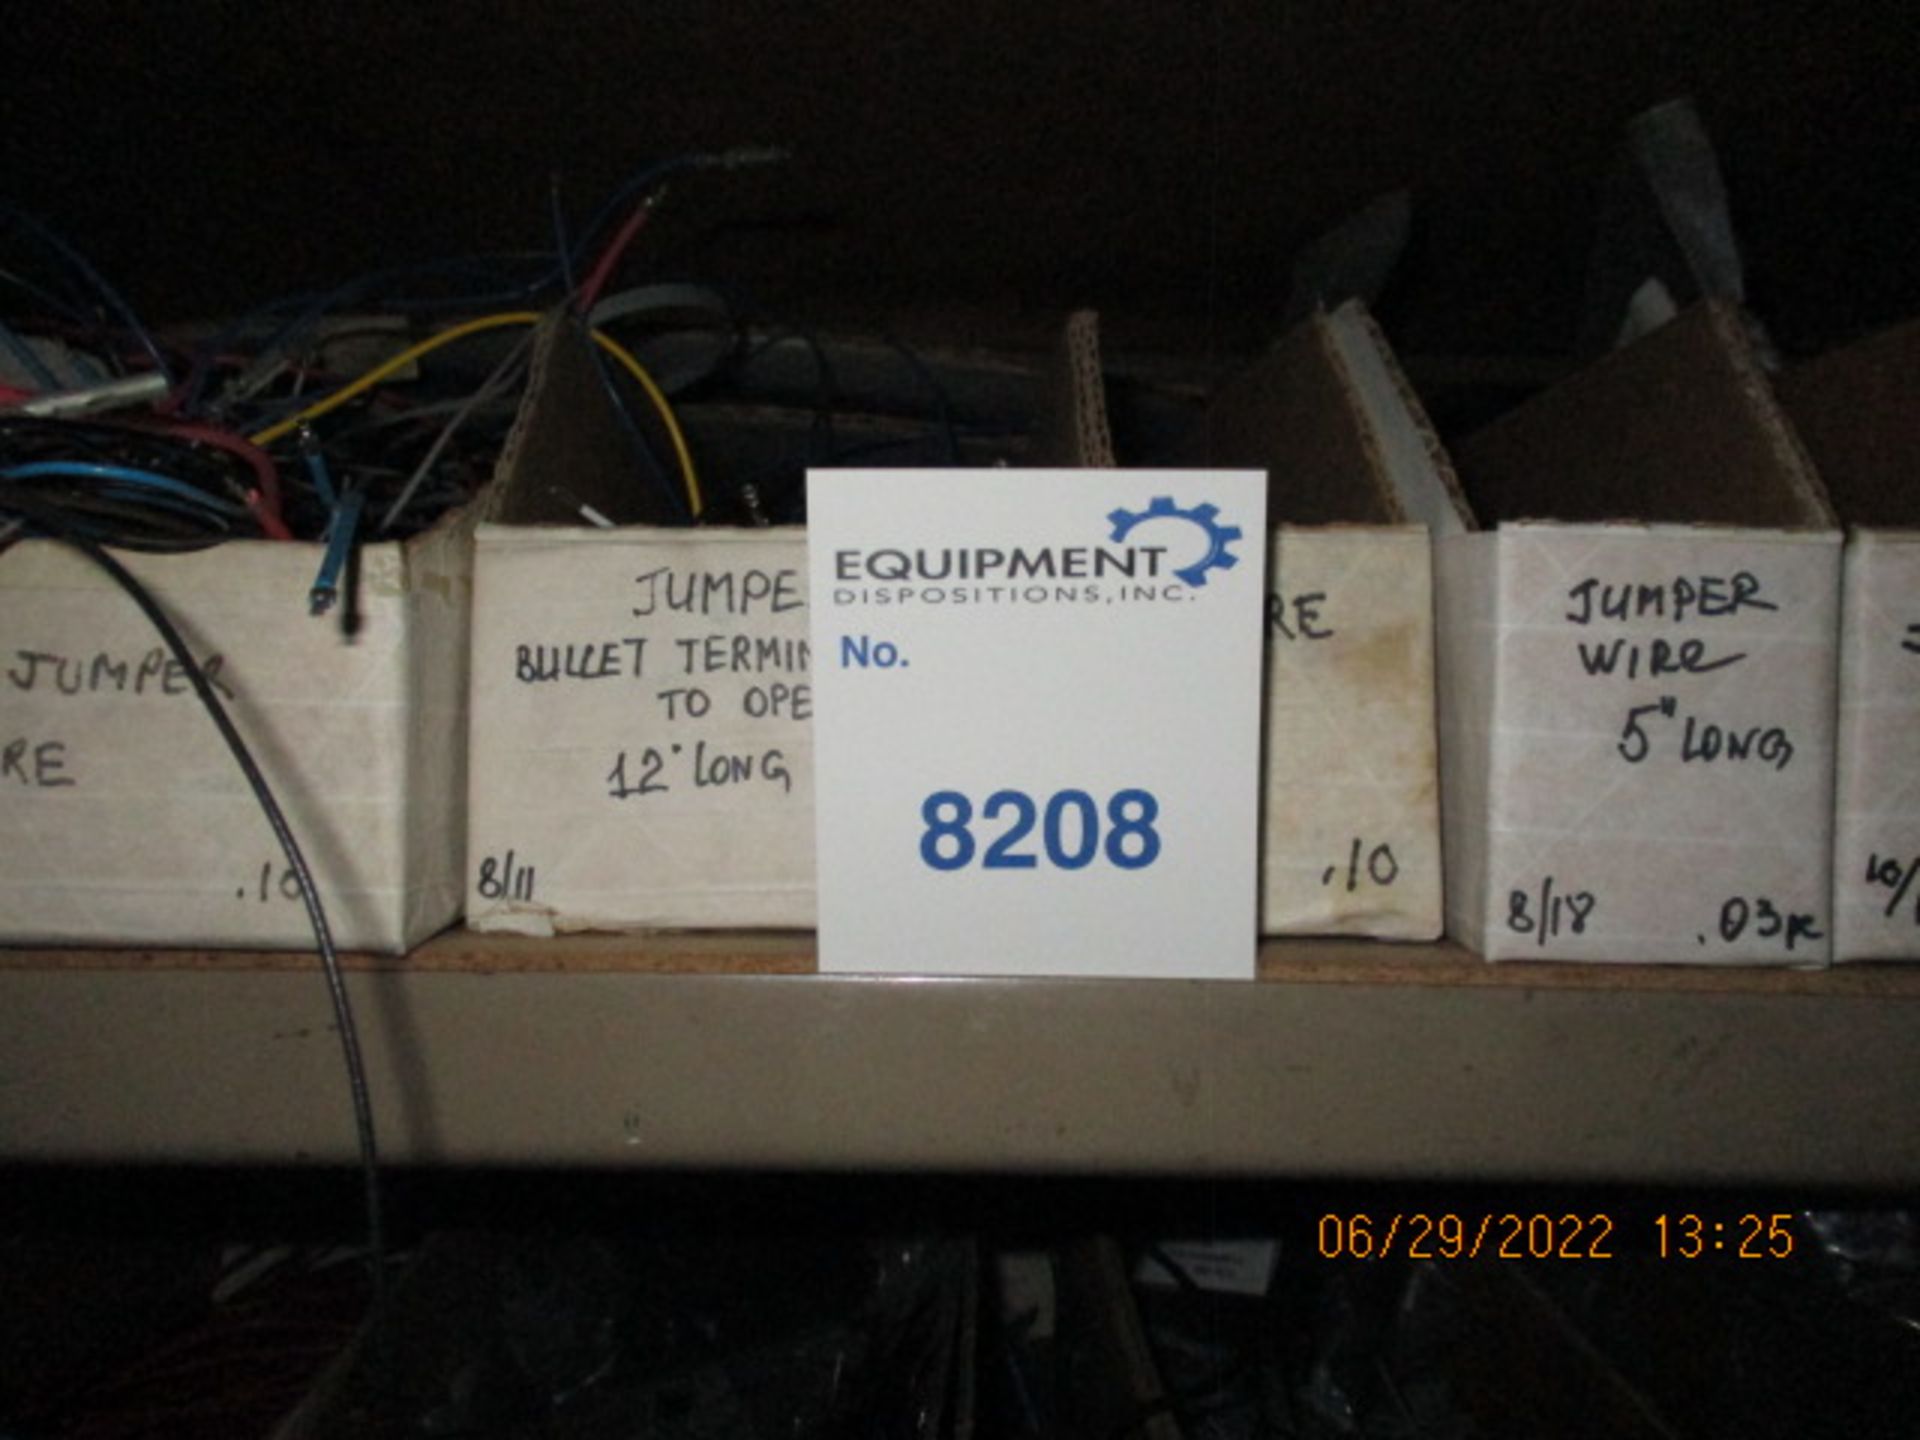 CONTENTS OF SHELVING UNIT CONSISTING OF ASSORTMENT OF JUMPER WIRES